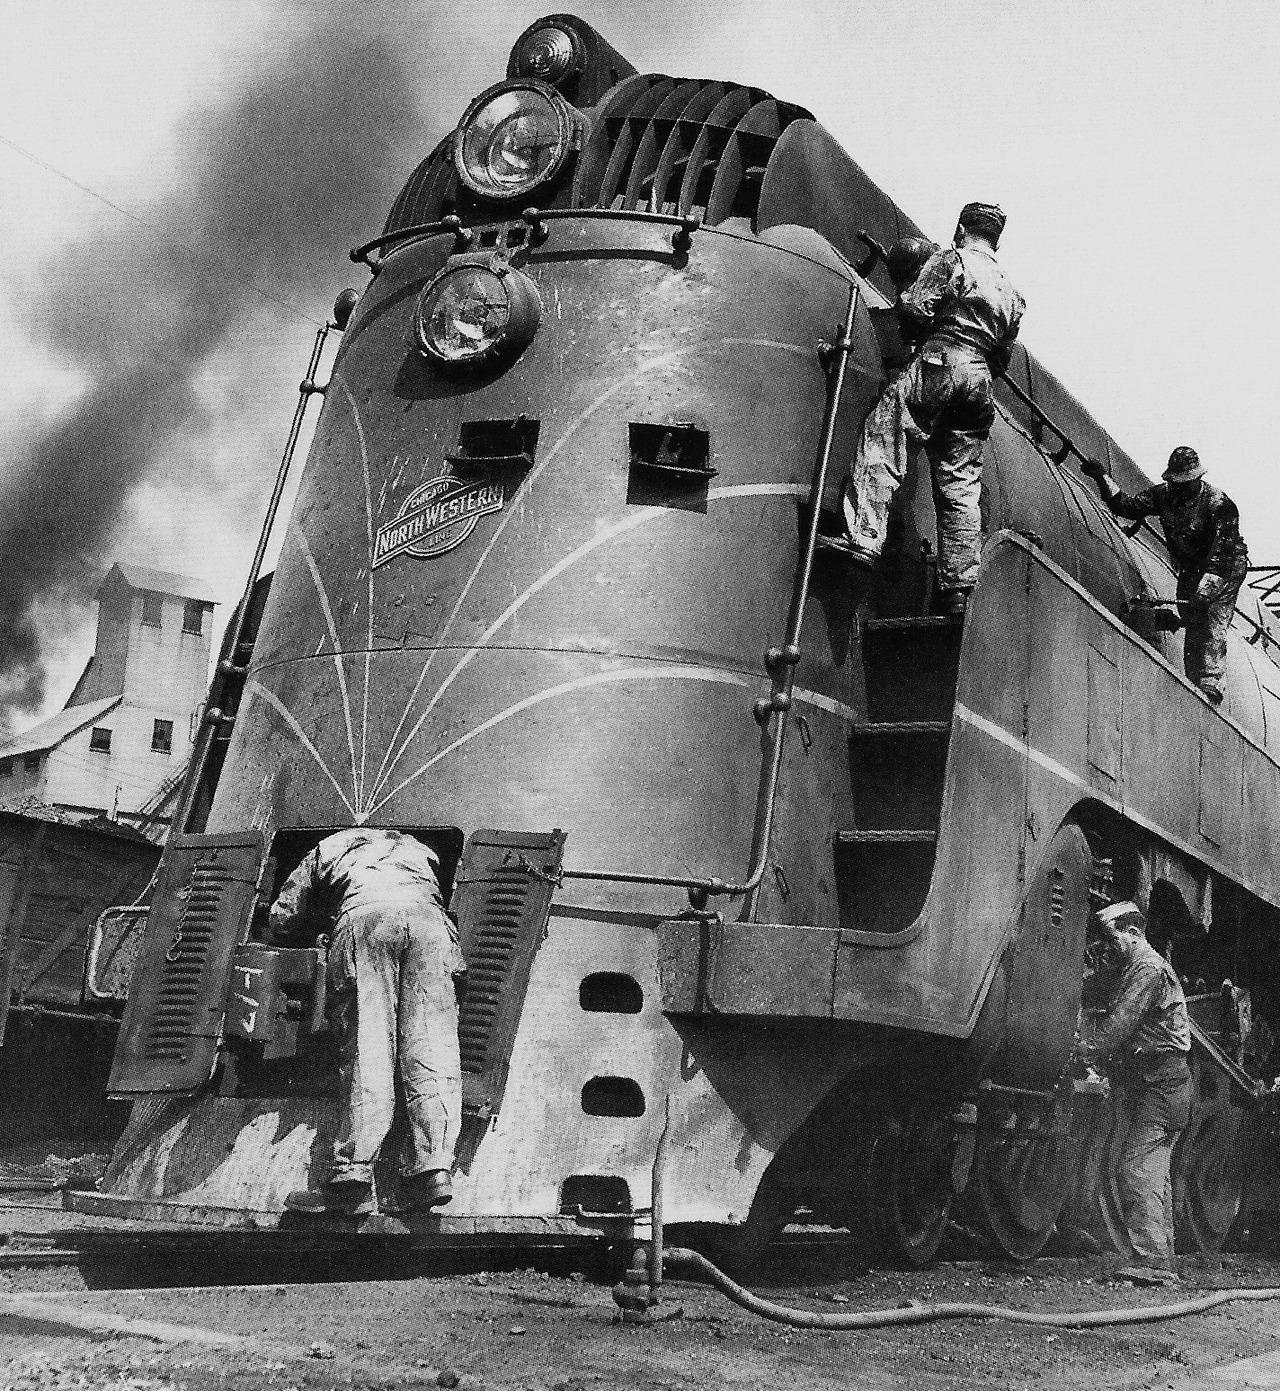 Soldiers working on a locomotive, Chicago, 1945.